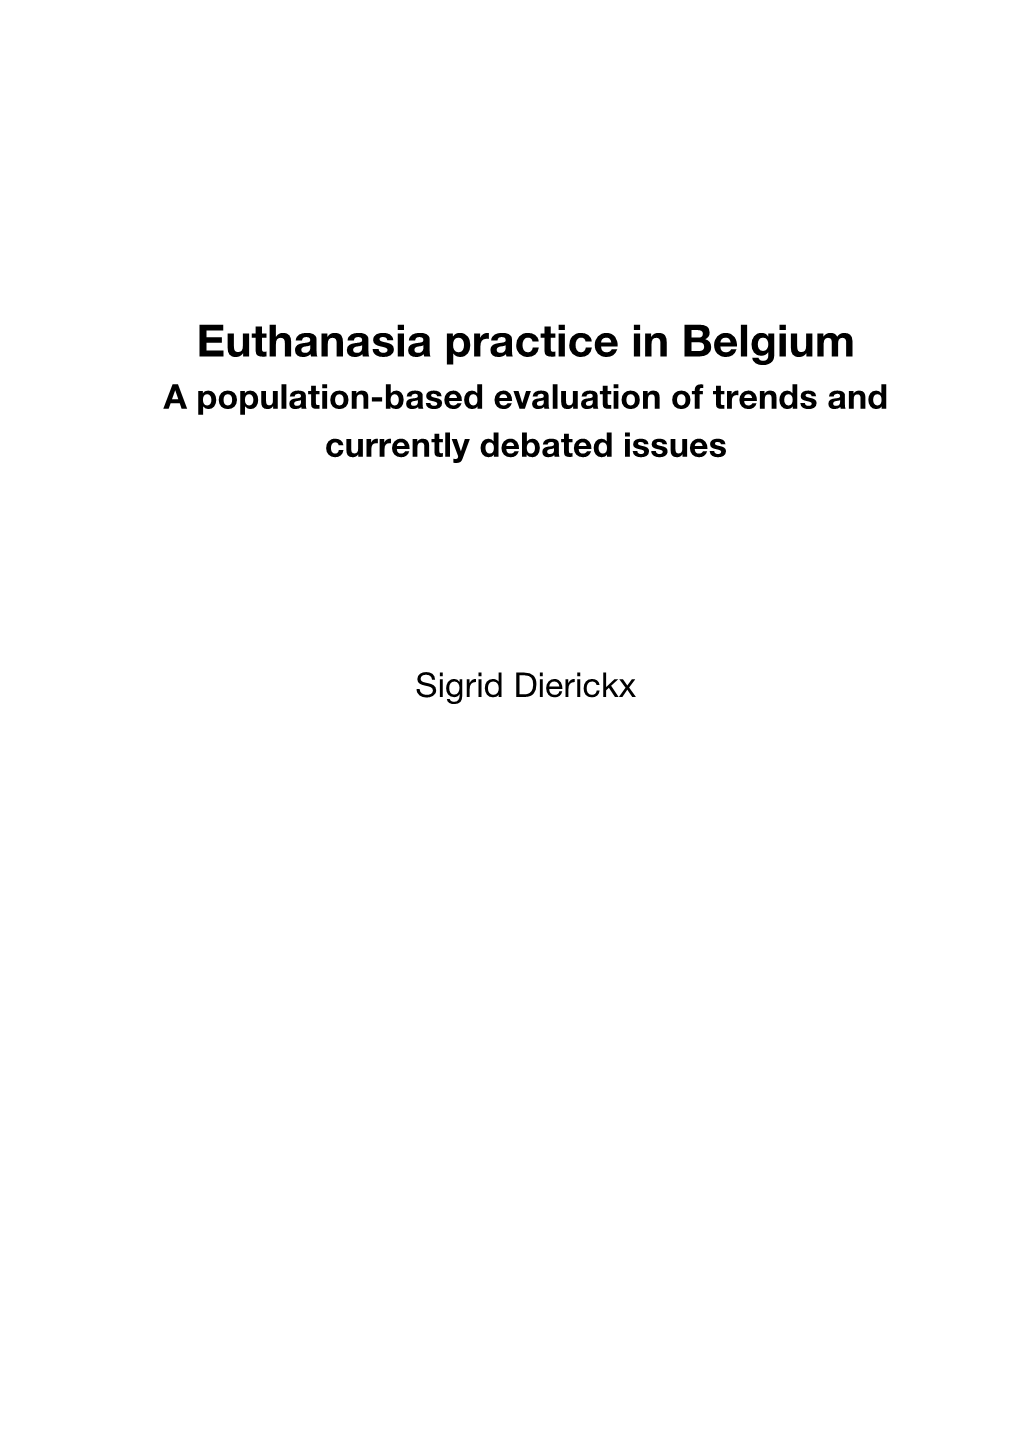 Euthanasia Practice in Belgium a Population-Based Evaluation of Trends and Currently Debated Issues